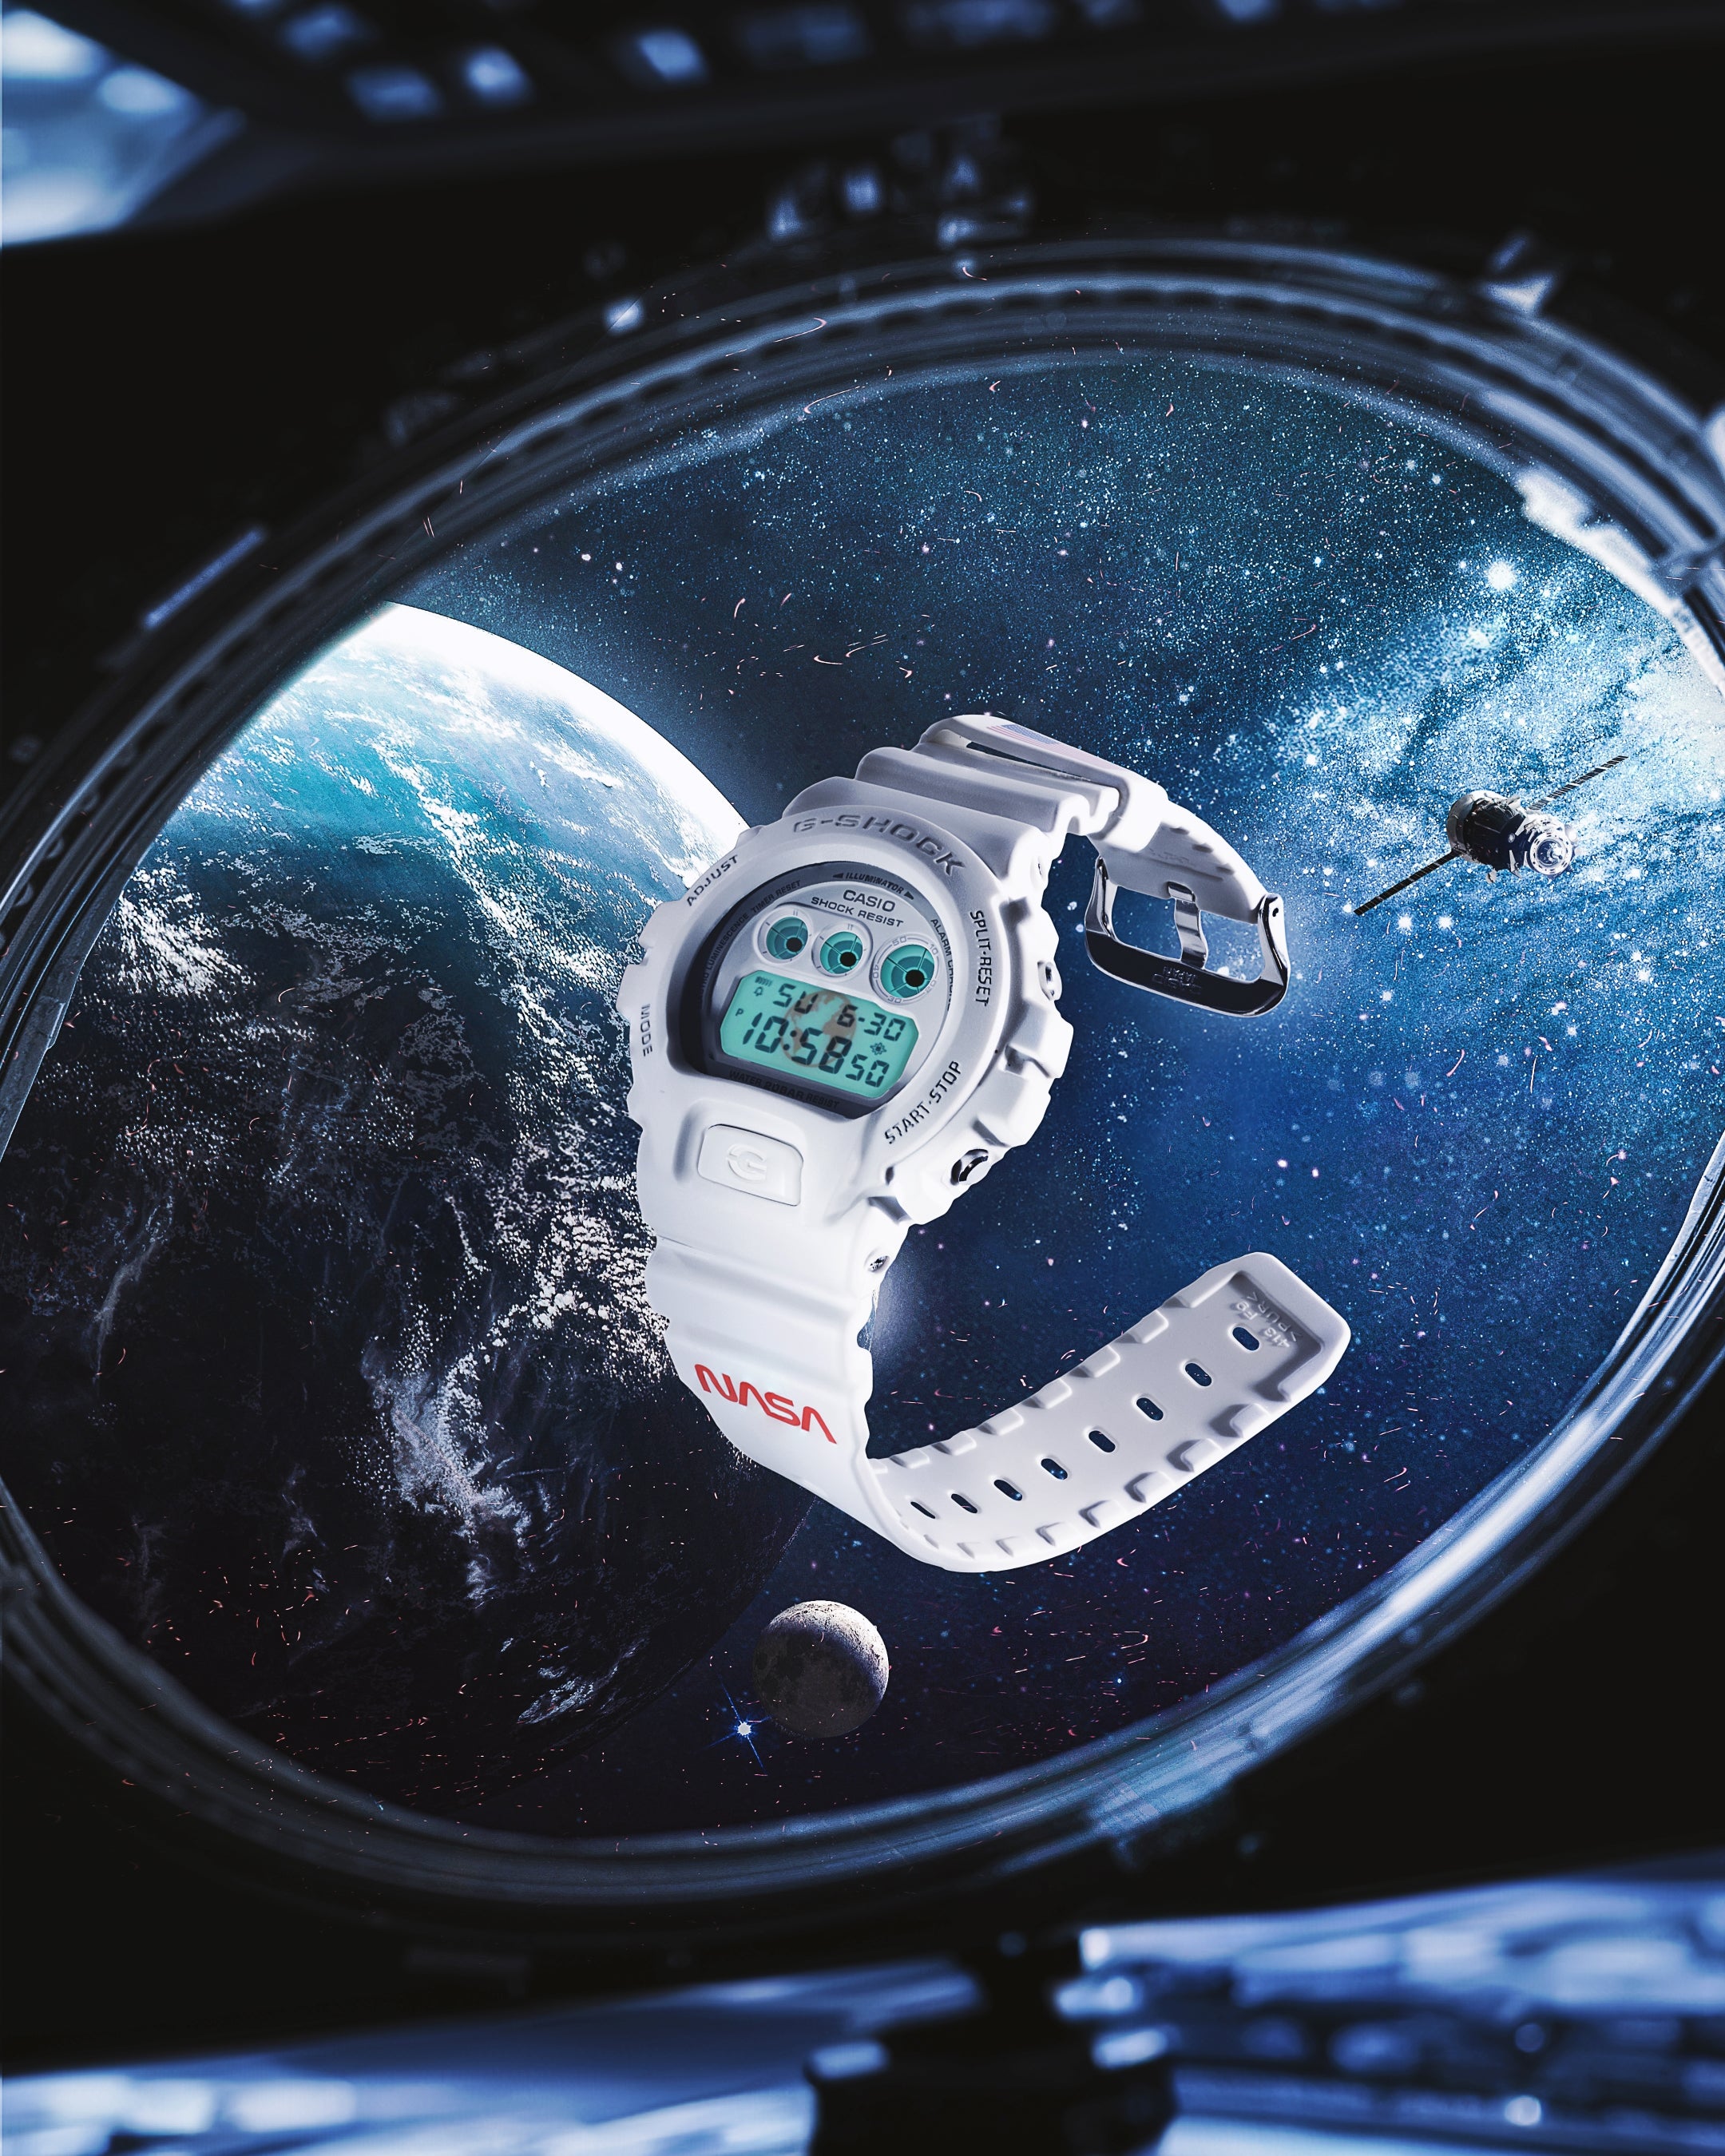 Image of the G-Shock DW6900NASA237 Digit Watch a tribute to NASA. The watch is features on a space shuttle in space. 